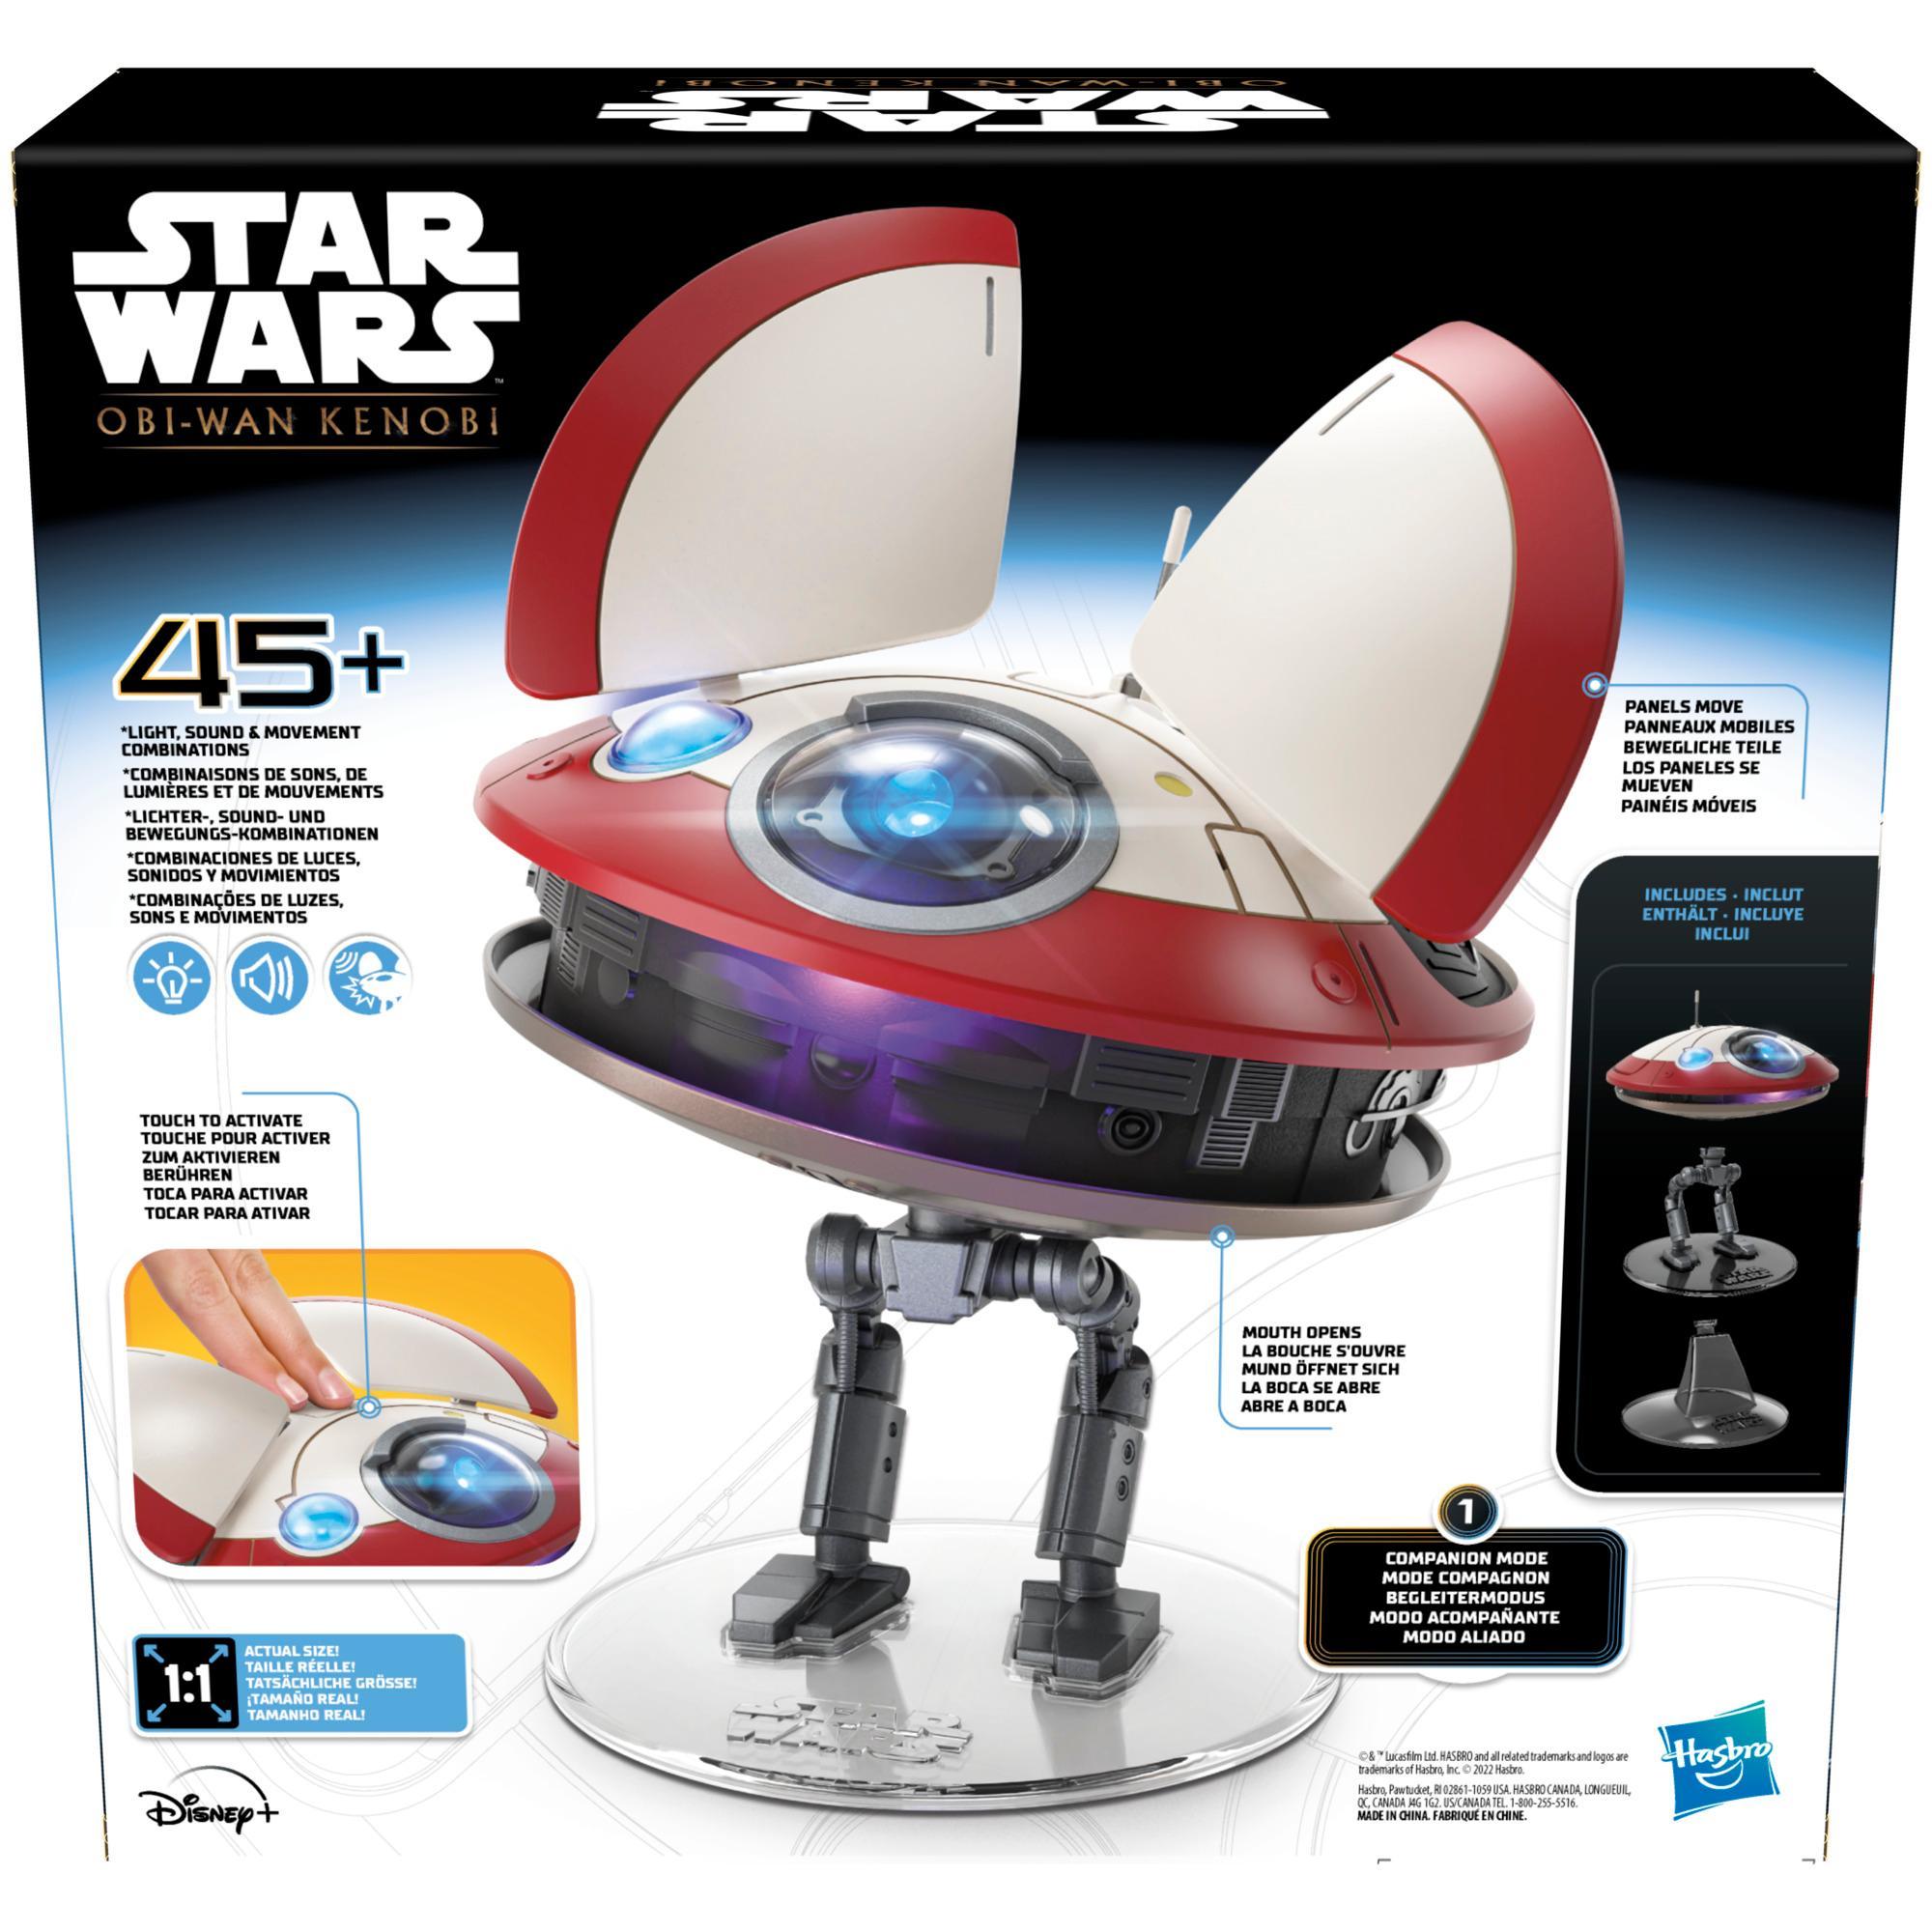 Star Wars L0-LA59 (Lola) Animatronic Edition, Obi-Wan Kenobi Series-Inspired Droid Toy for Kids Ages 4 and Up product thumbnail 1